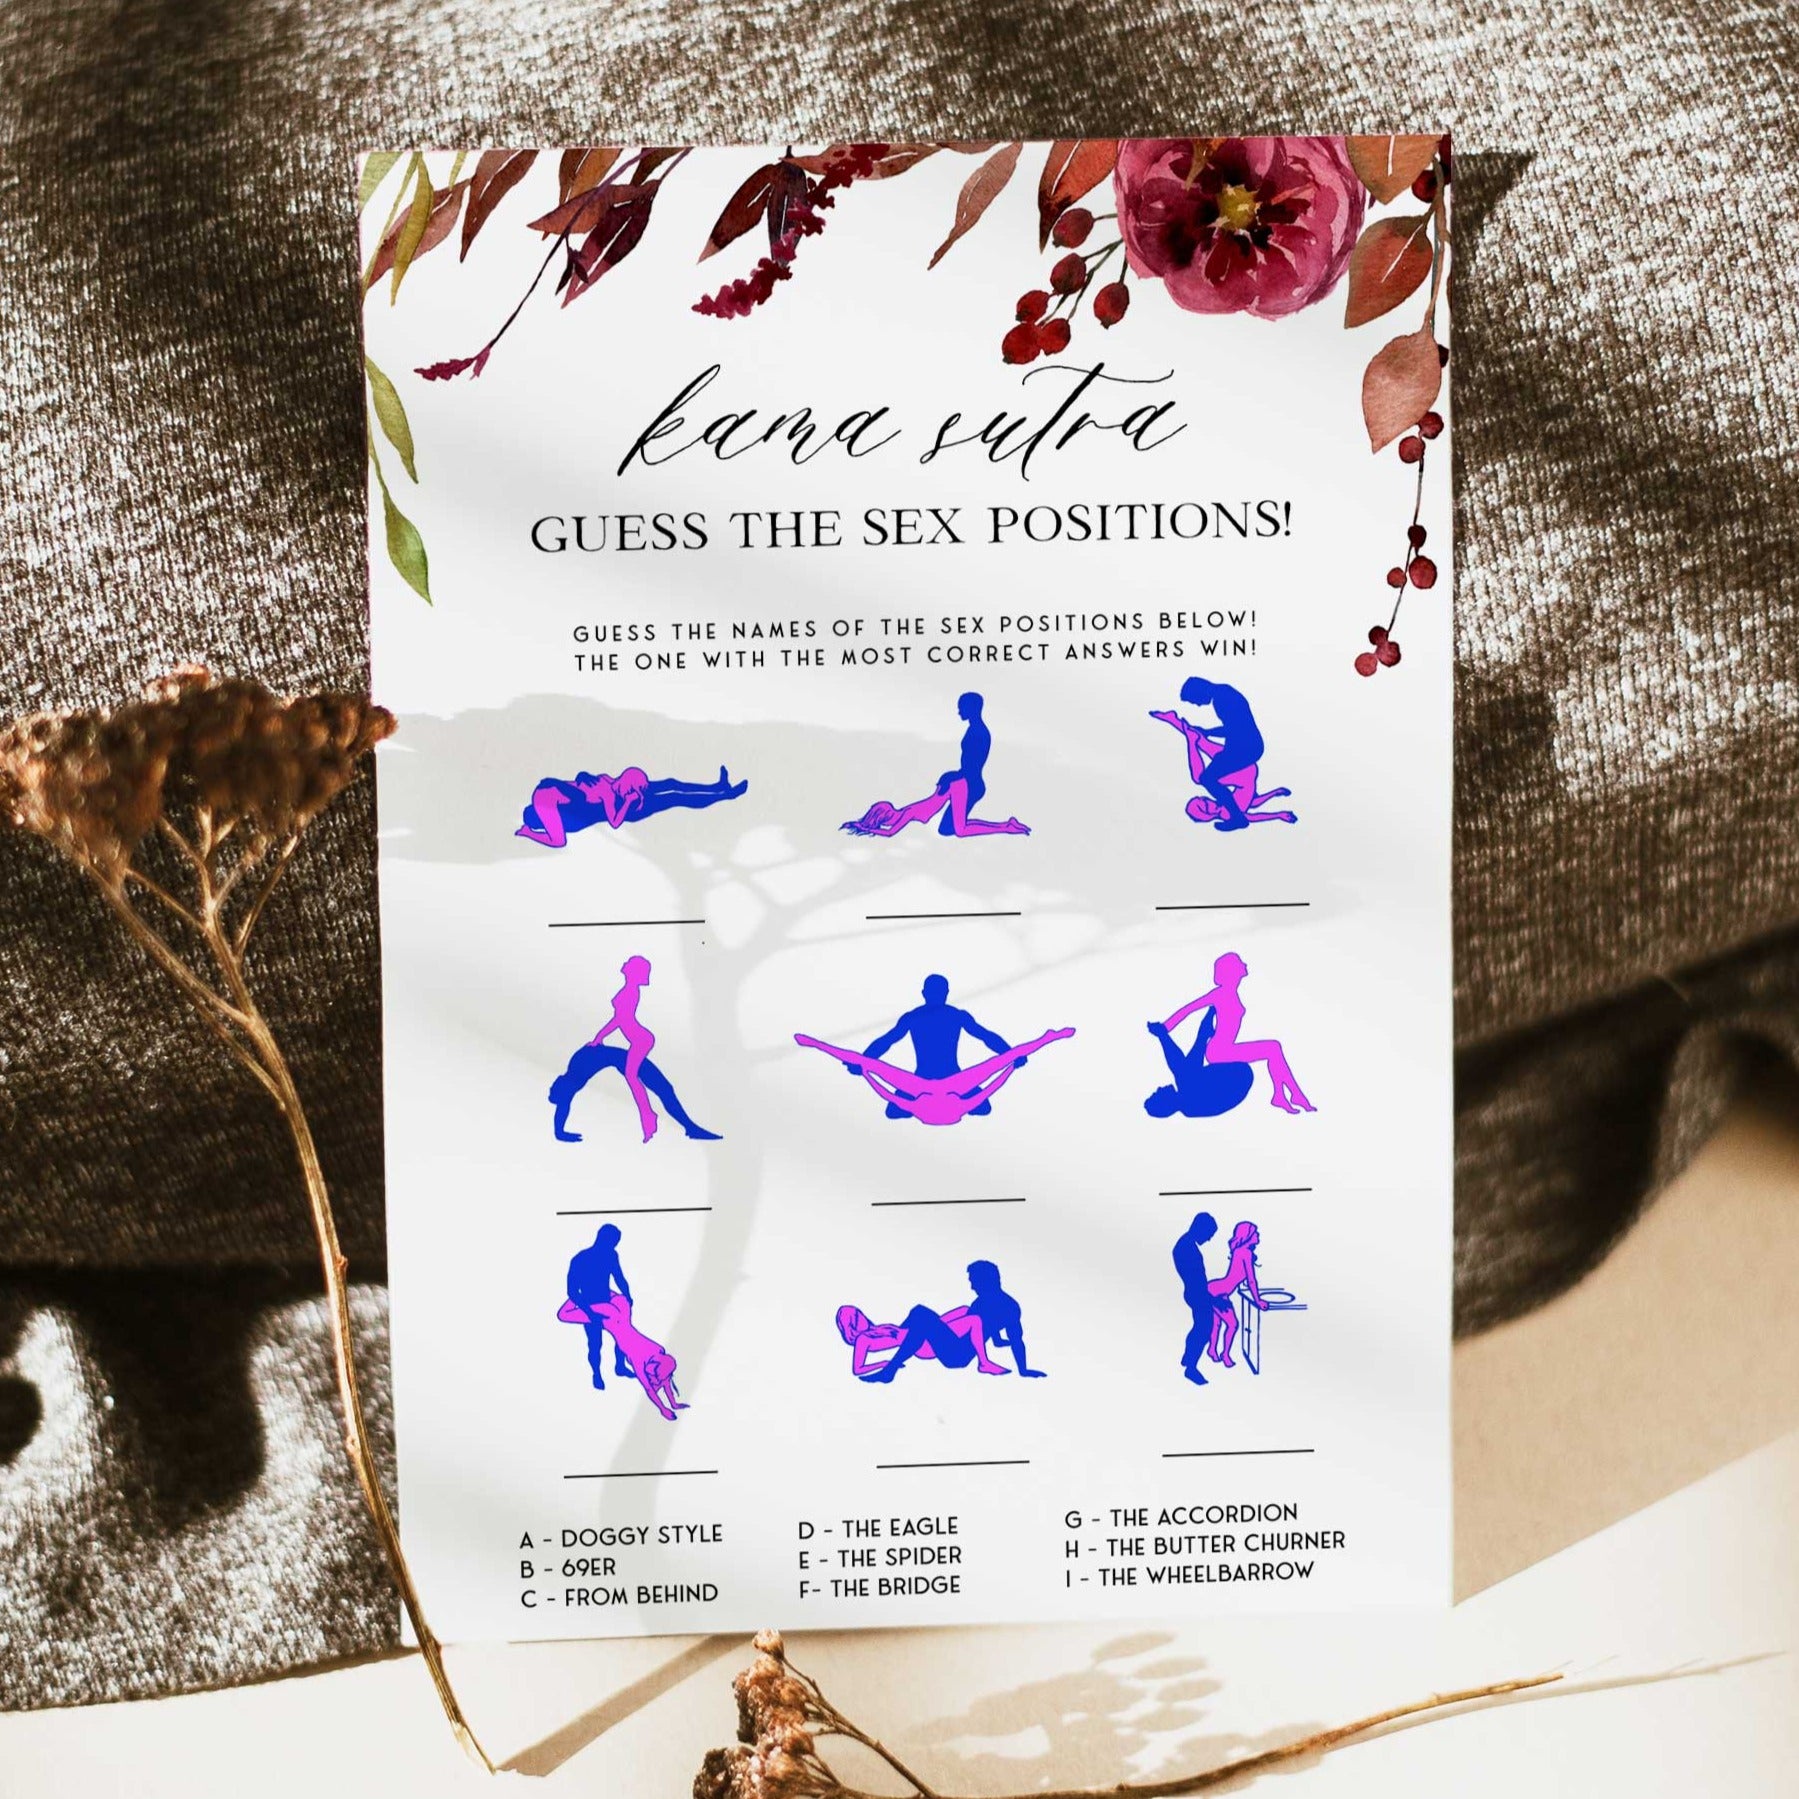 Fully editable and printable guess the sex positions games with a Fall design. Perfect for a fall floral bridal shower